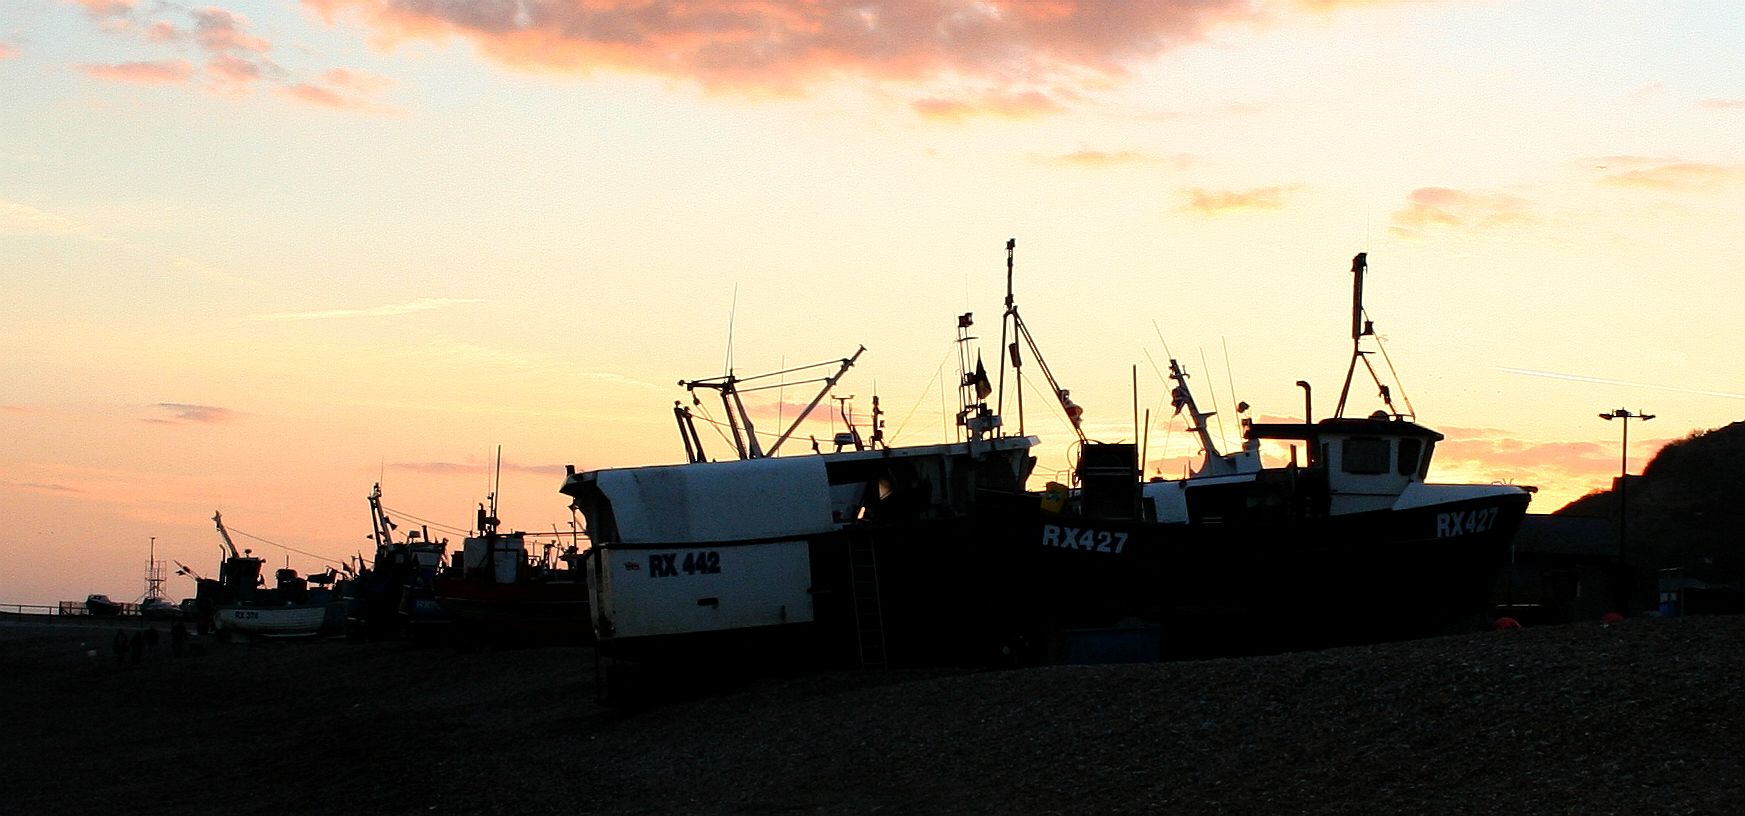 World's largest beach launched fishing fleet is @ Hastings#